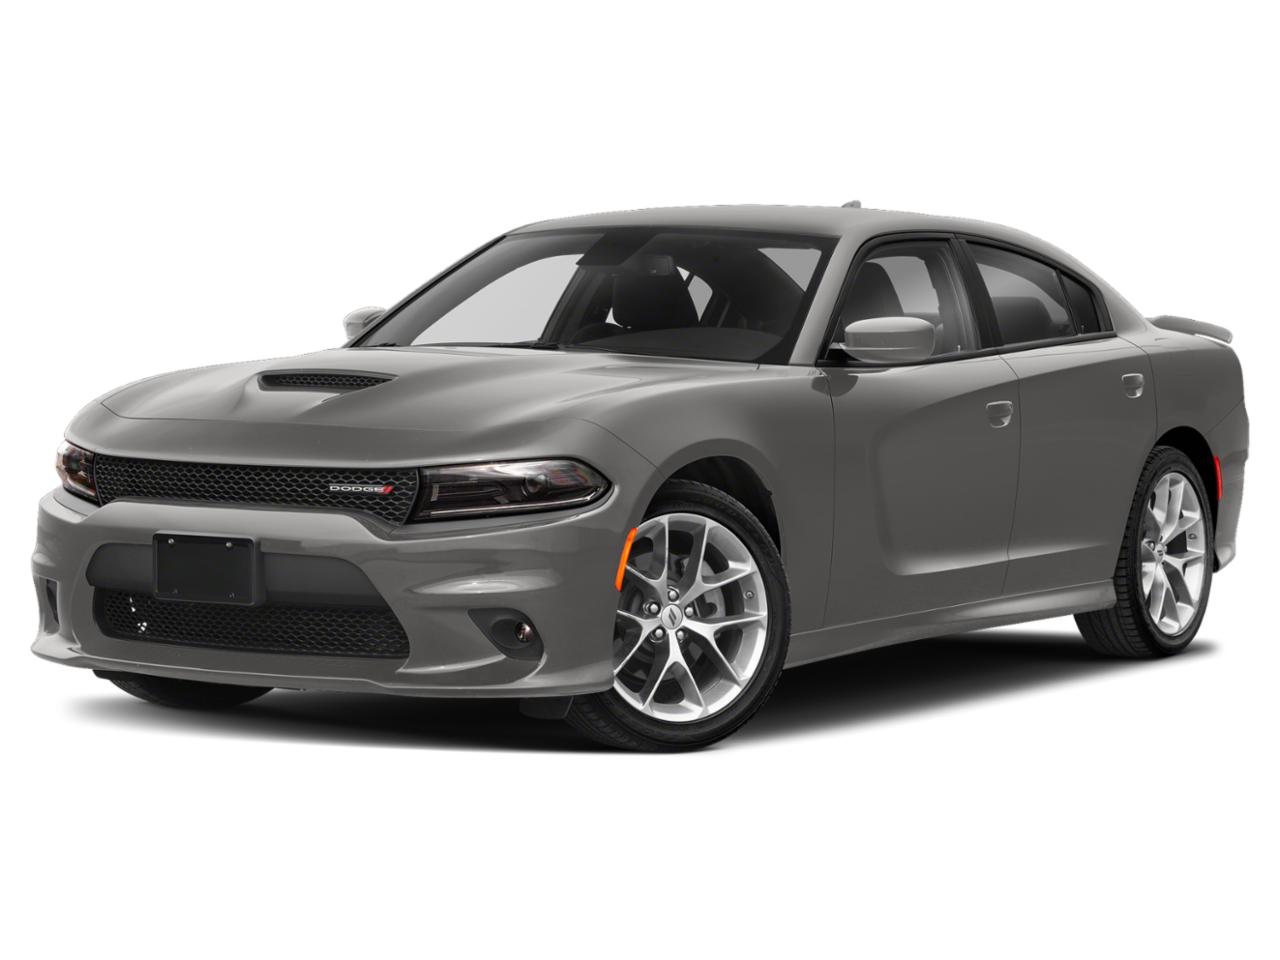 Used, Certified Dodge Charger Cars, Trucks, SUVs for Sale in BOWLING GREEN,  MO | Boland Chevrolet